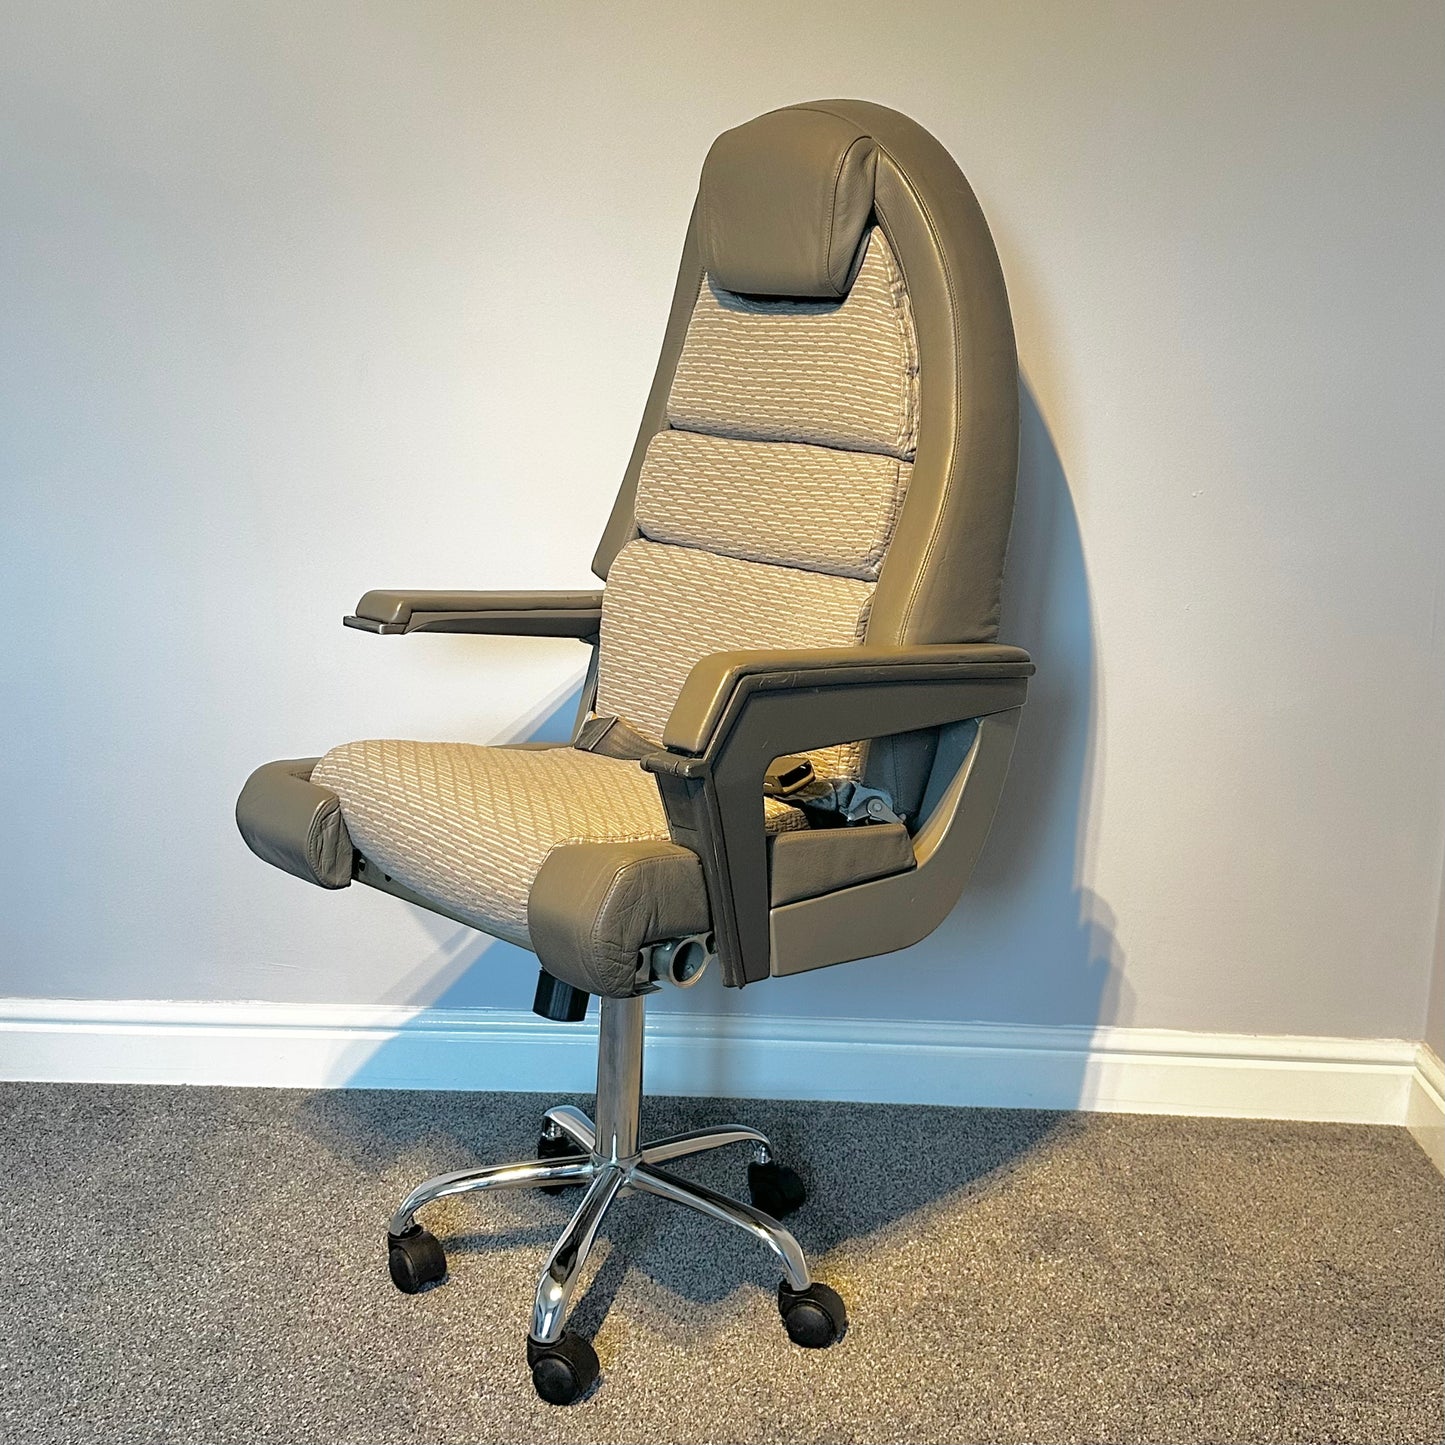 British Airways Concorde Upcycled Office Desk Chair